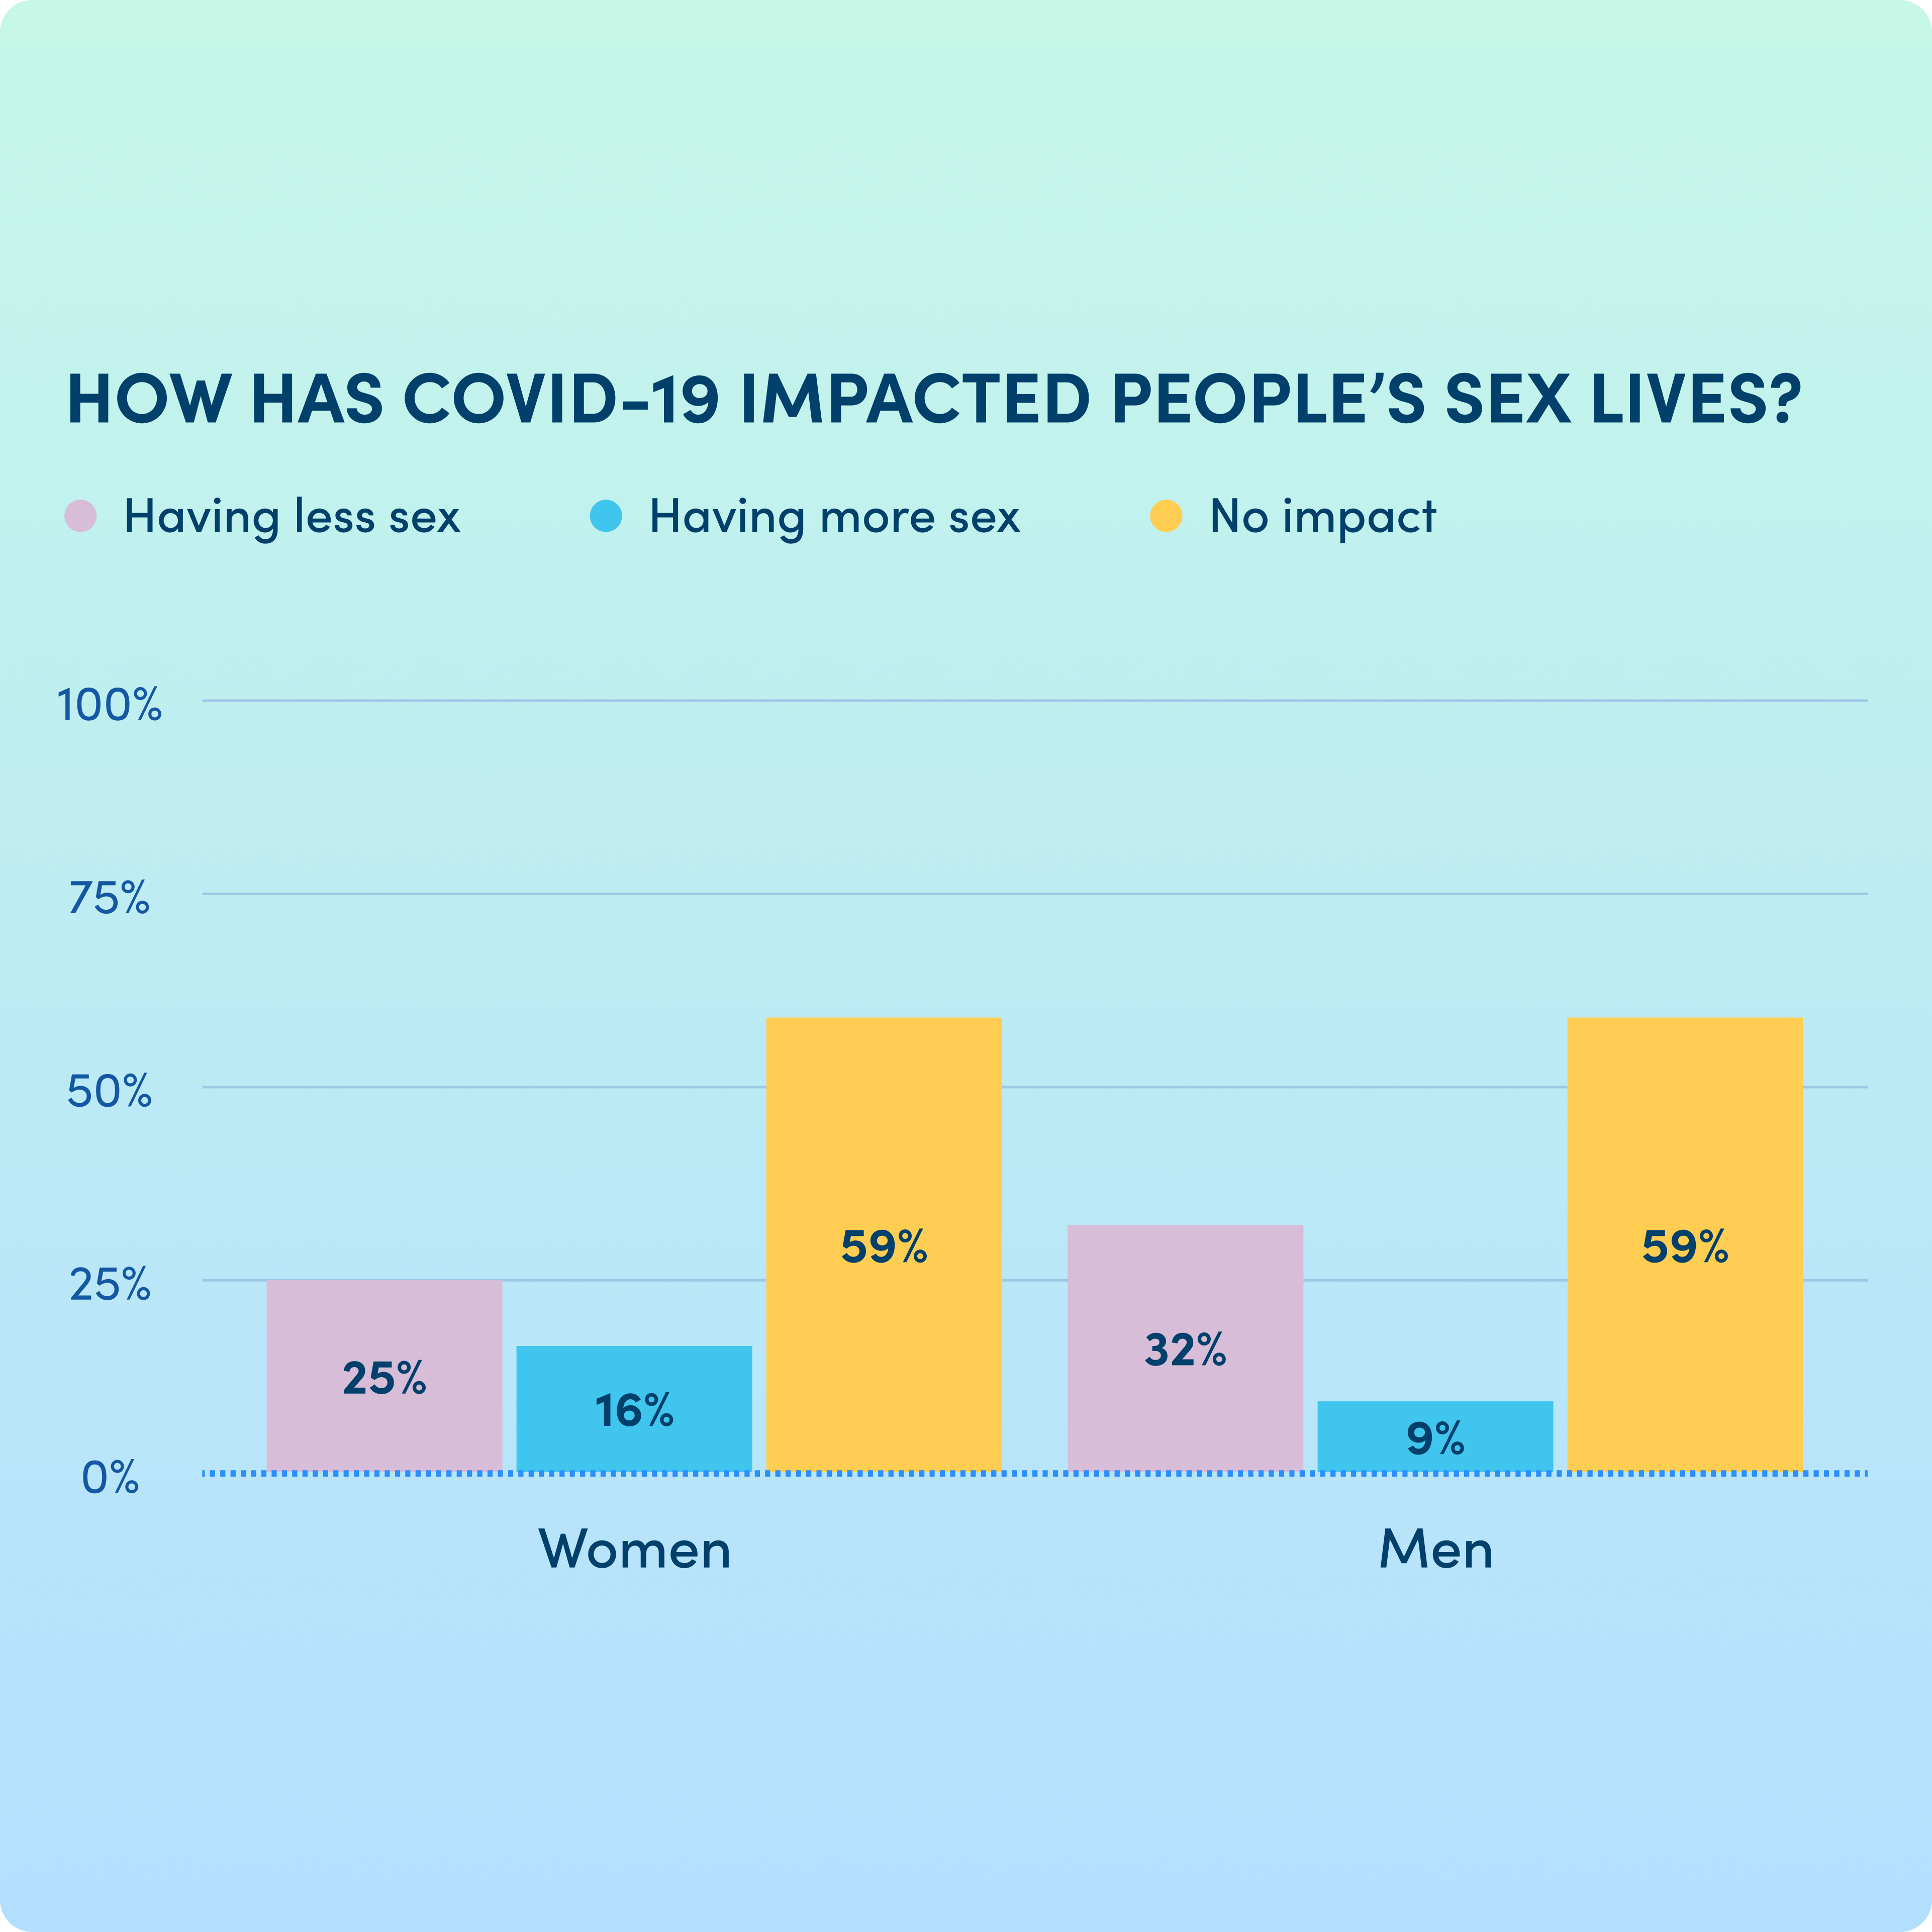 Fifth slide of an Instagram carousel post with a bar chart of how COVID has affected people's sex lives